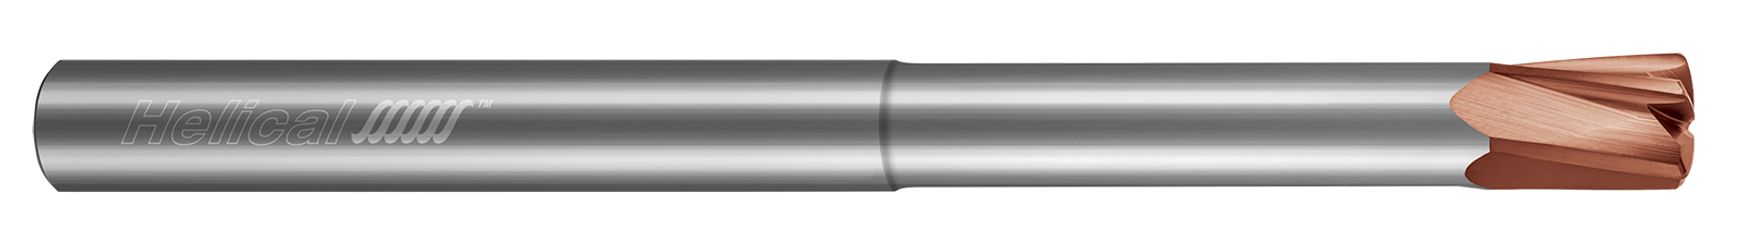 High Feed End Mills - Steels up to 45 Rc - Metric - Variable Pitch - Reduced Neck